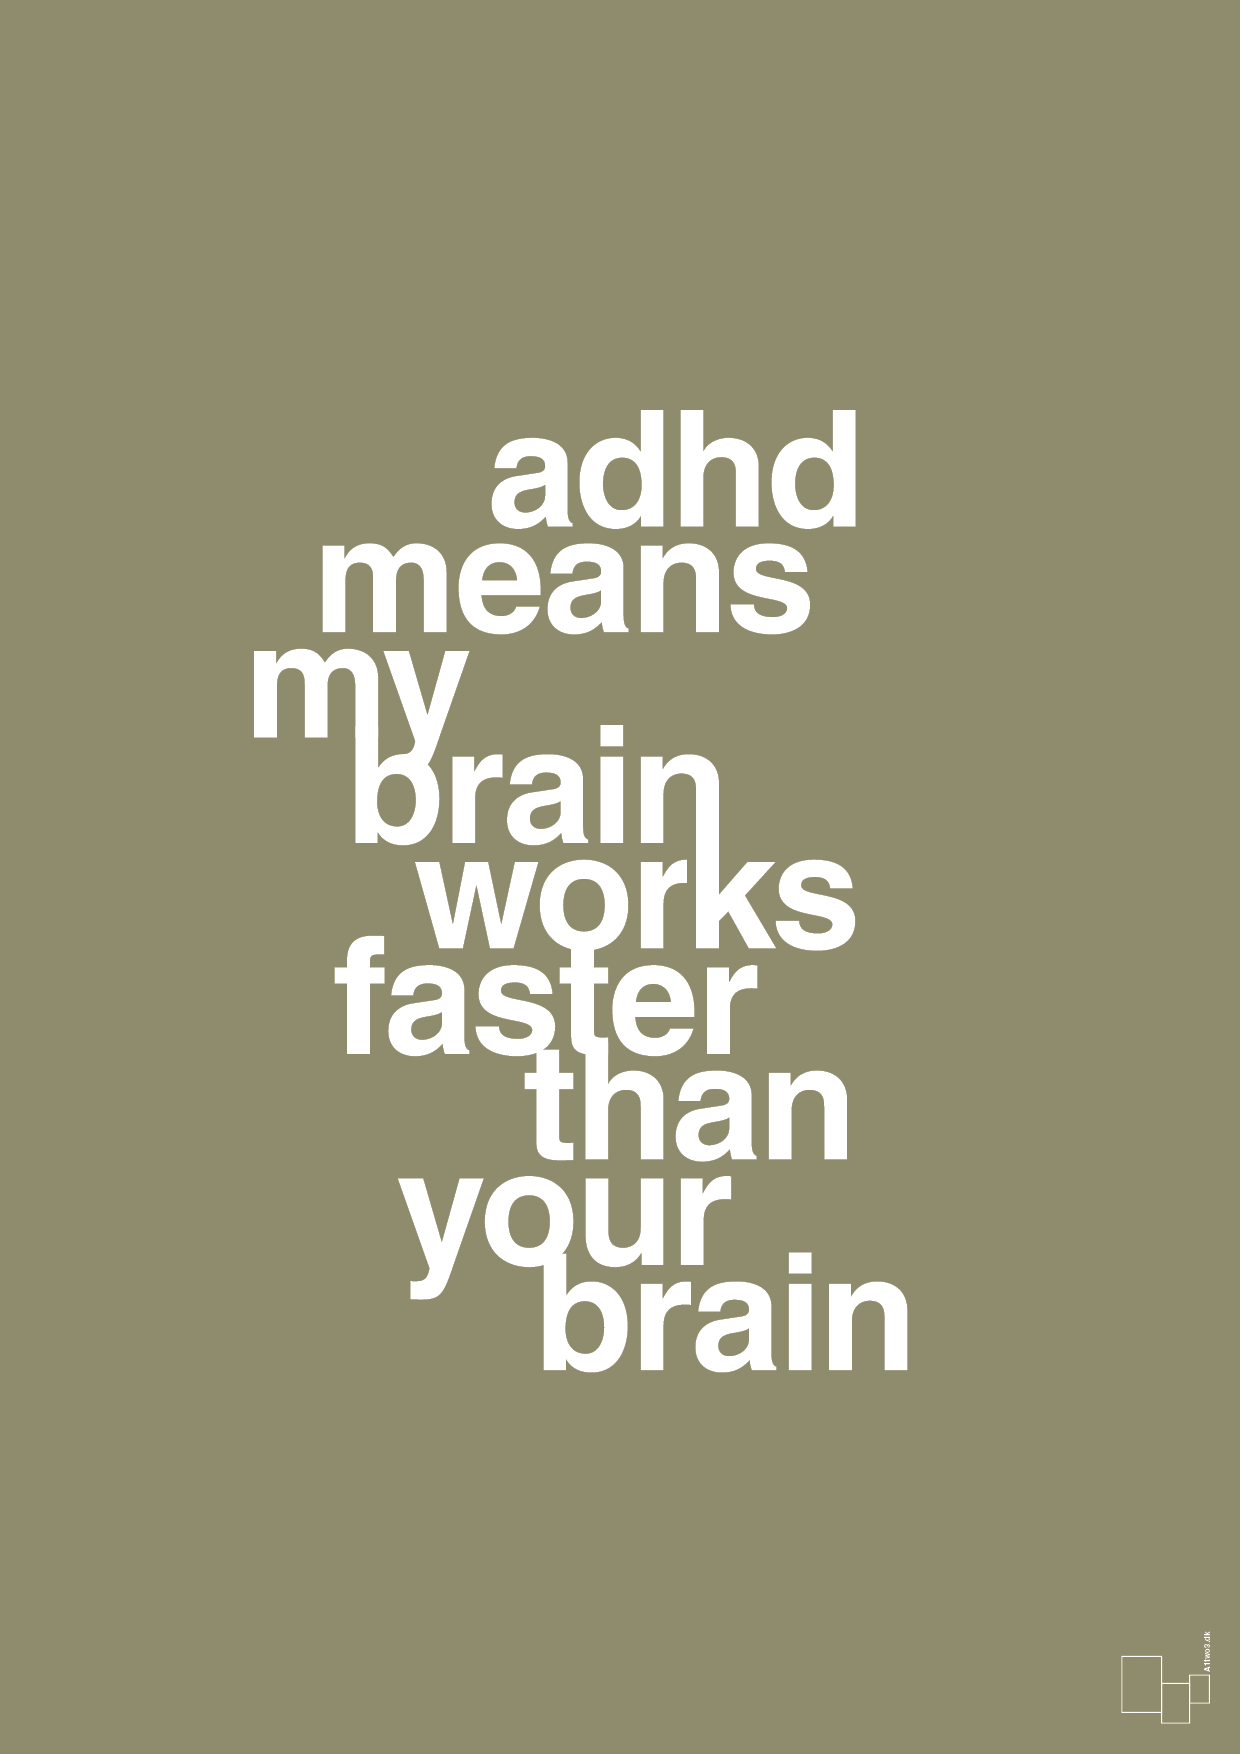 adhd means my brain works faster than your brain - Plakat med Samfund i Misty Forrest